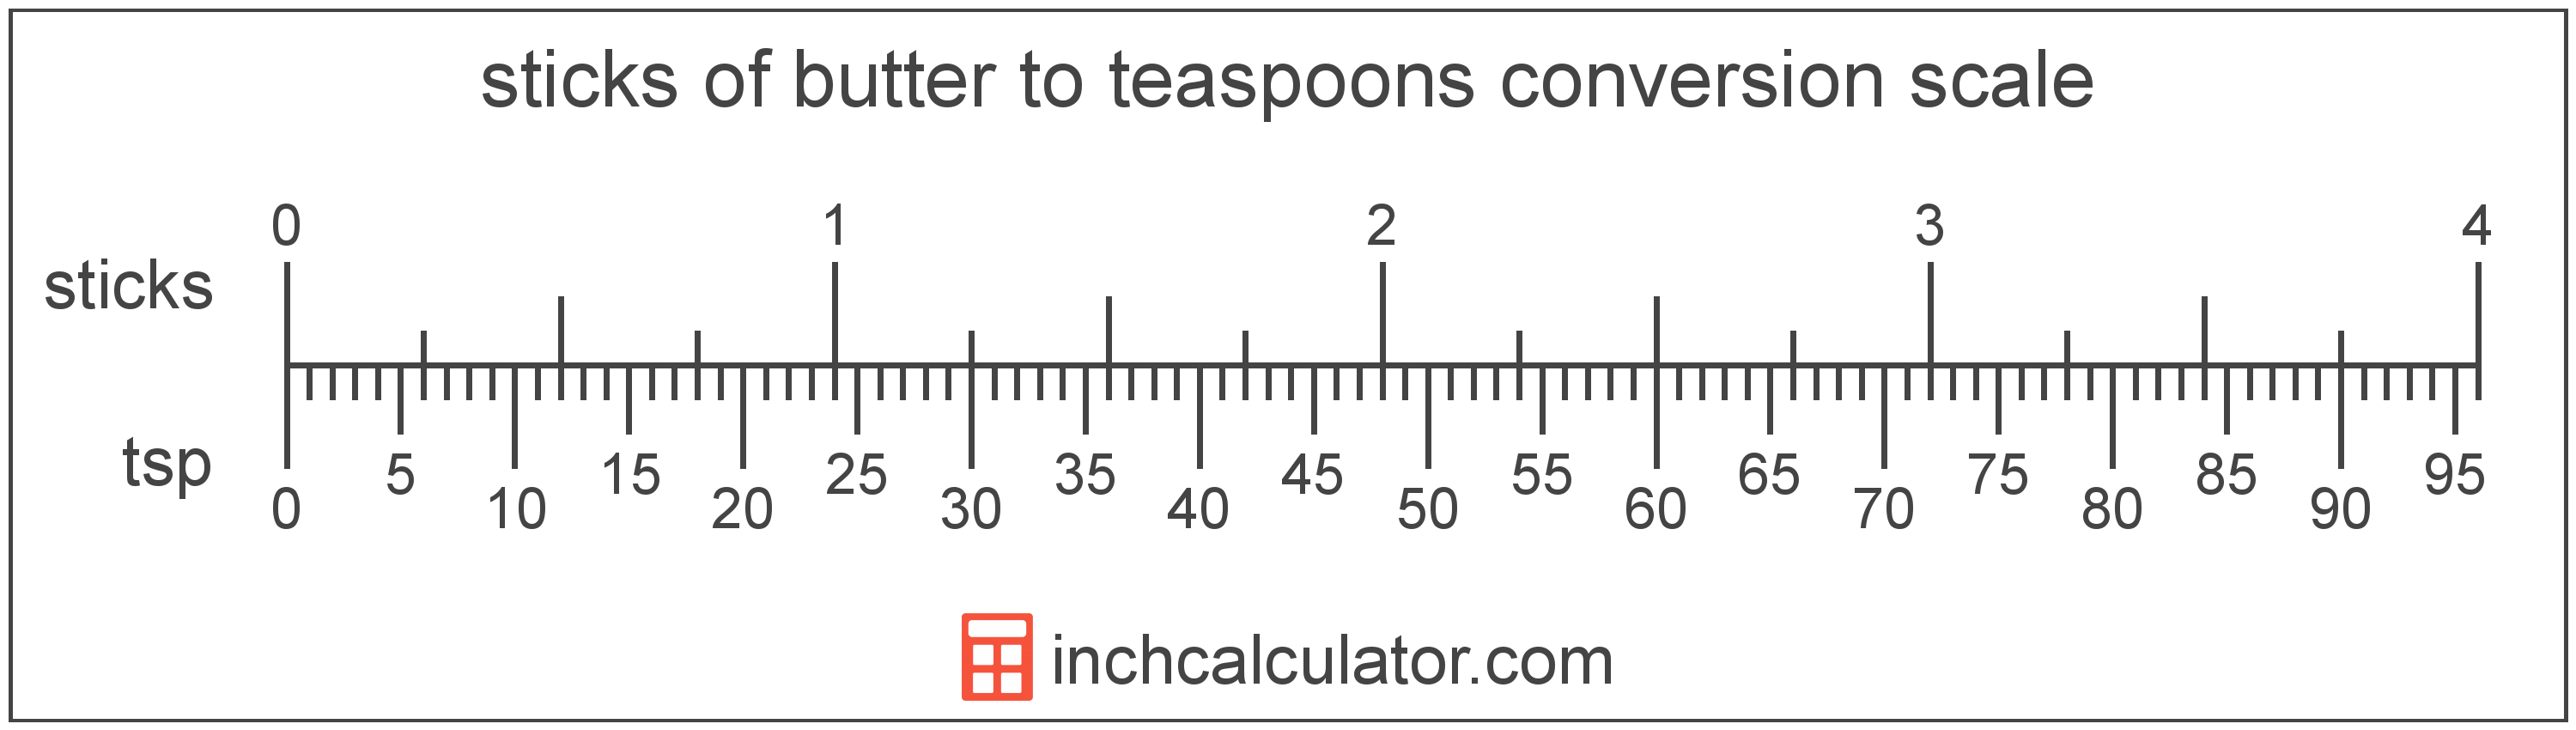 conversion scale showing teaspoons and equivalent sticks of butter butter values